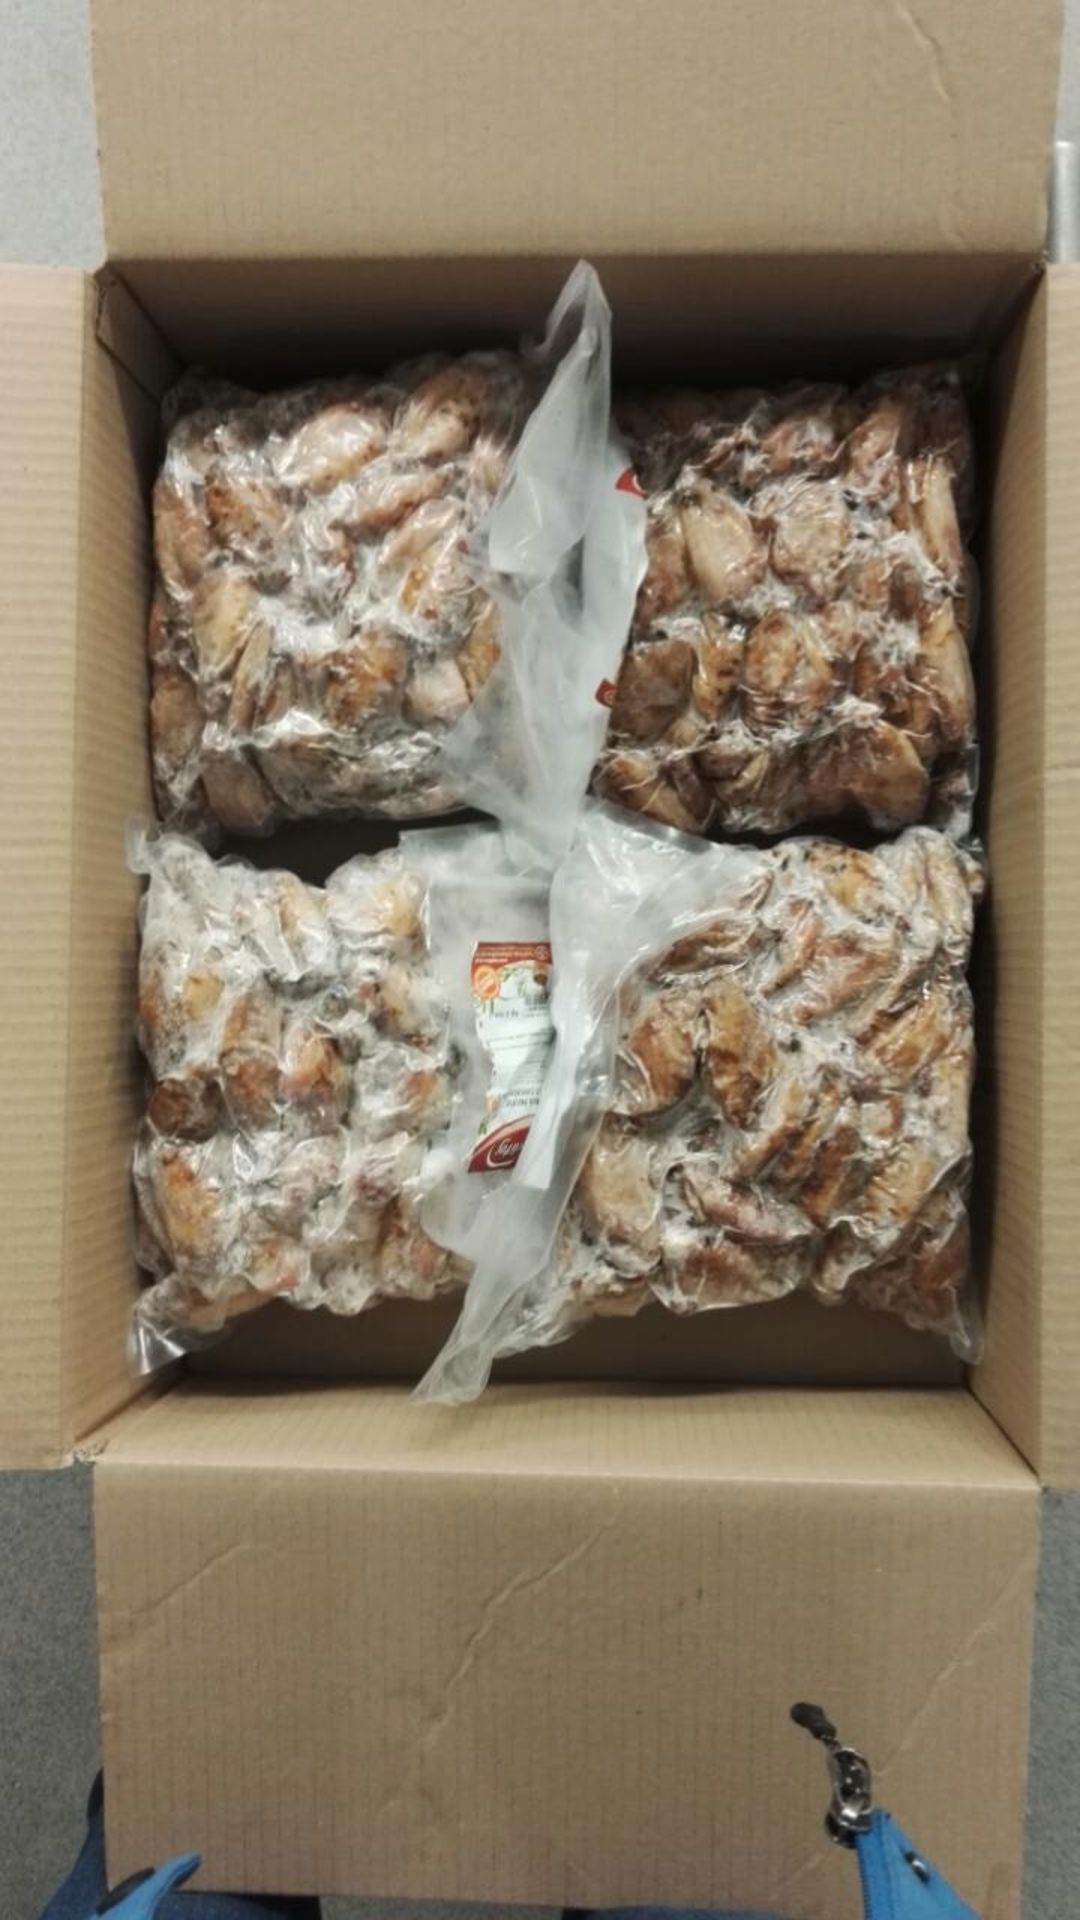 1 x pallet of Rio Pacific Roasted Chicken joint wings (Frozen) - Image 2 of 4